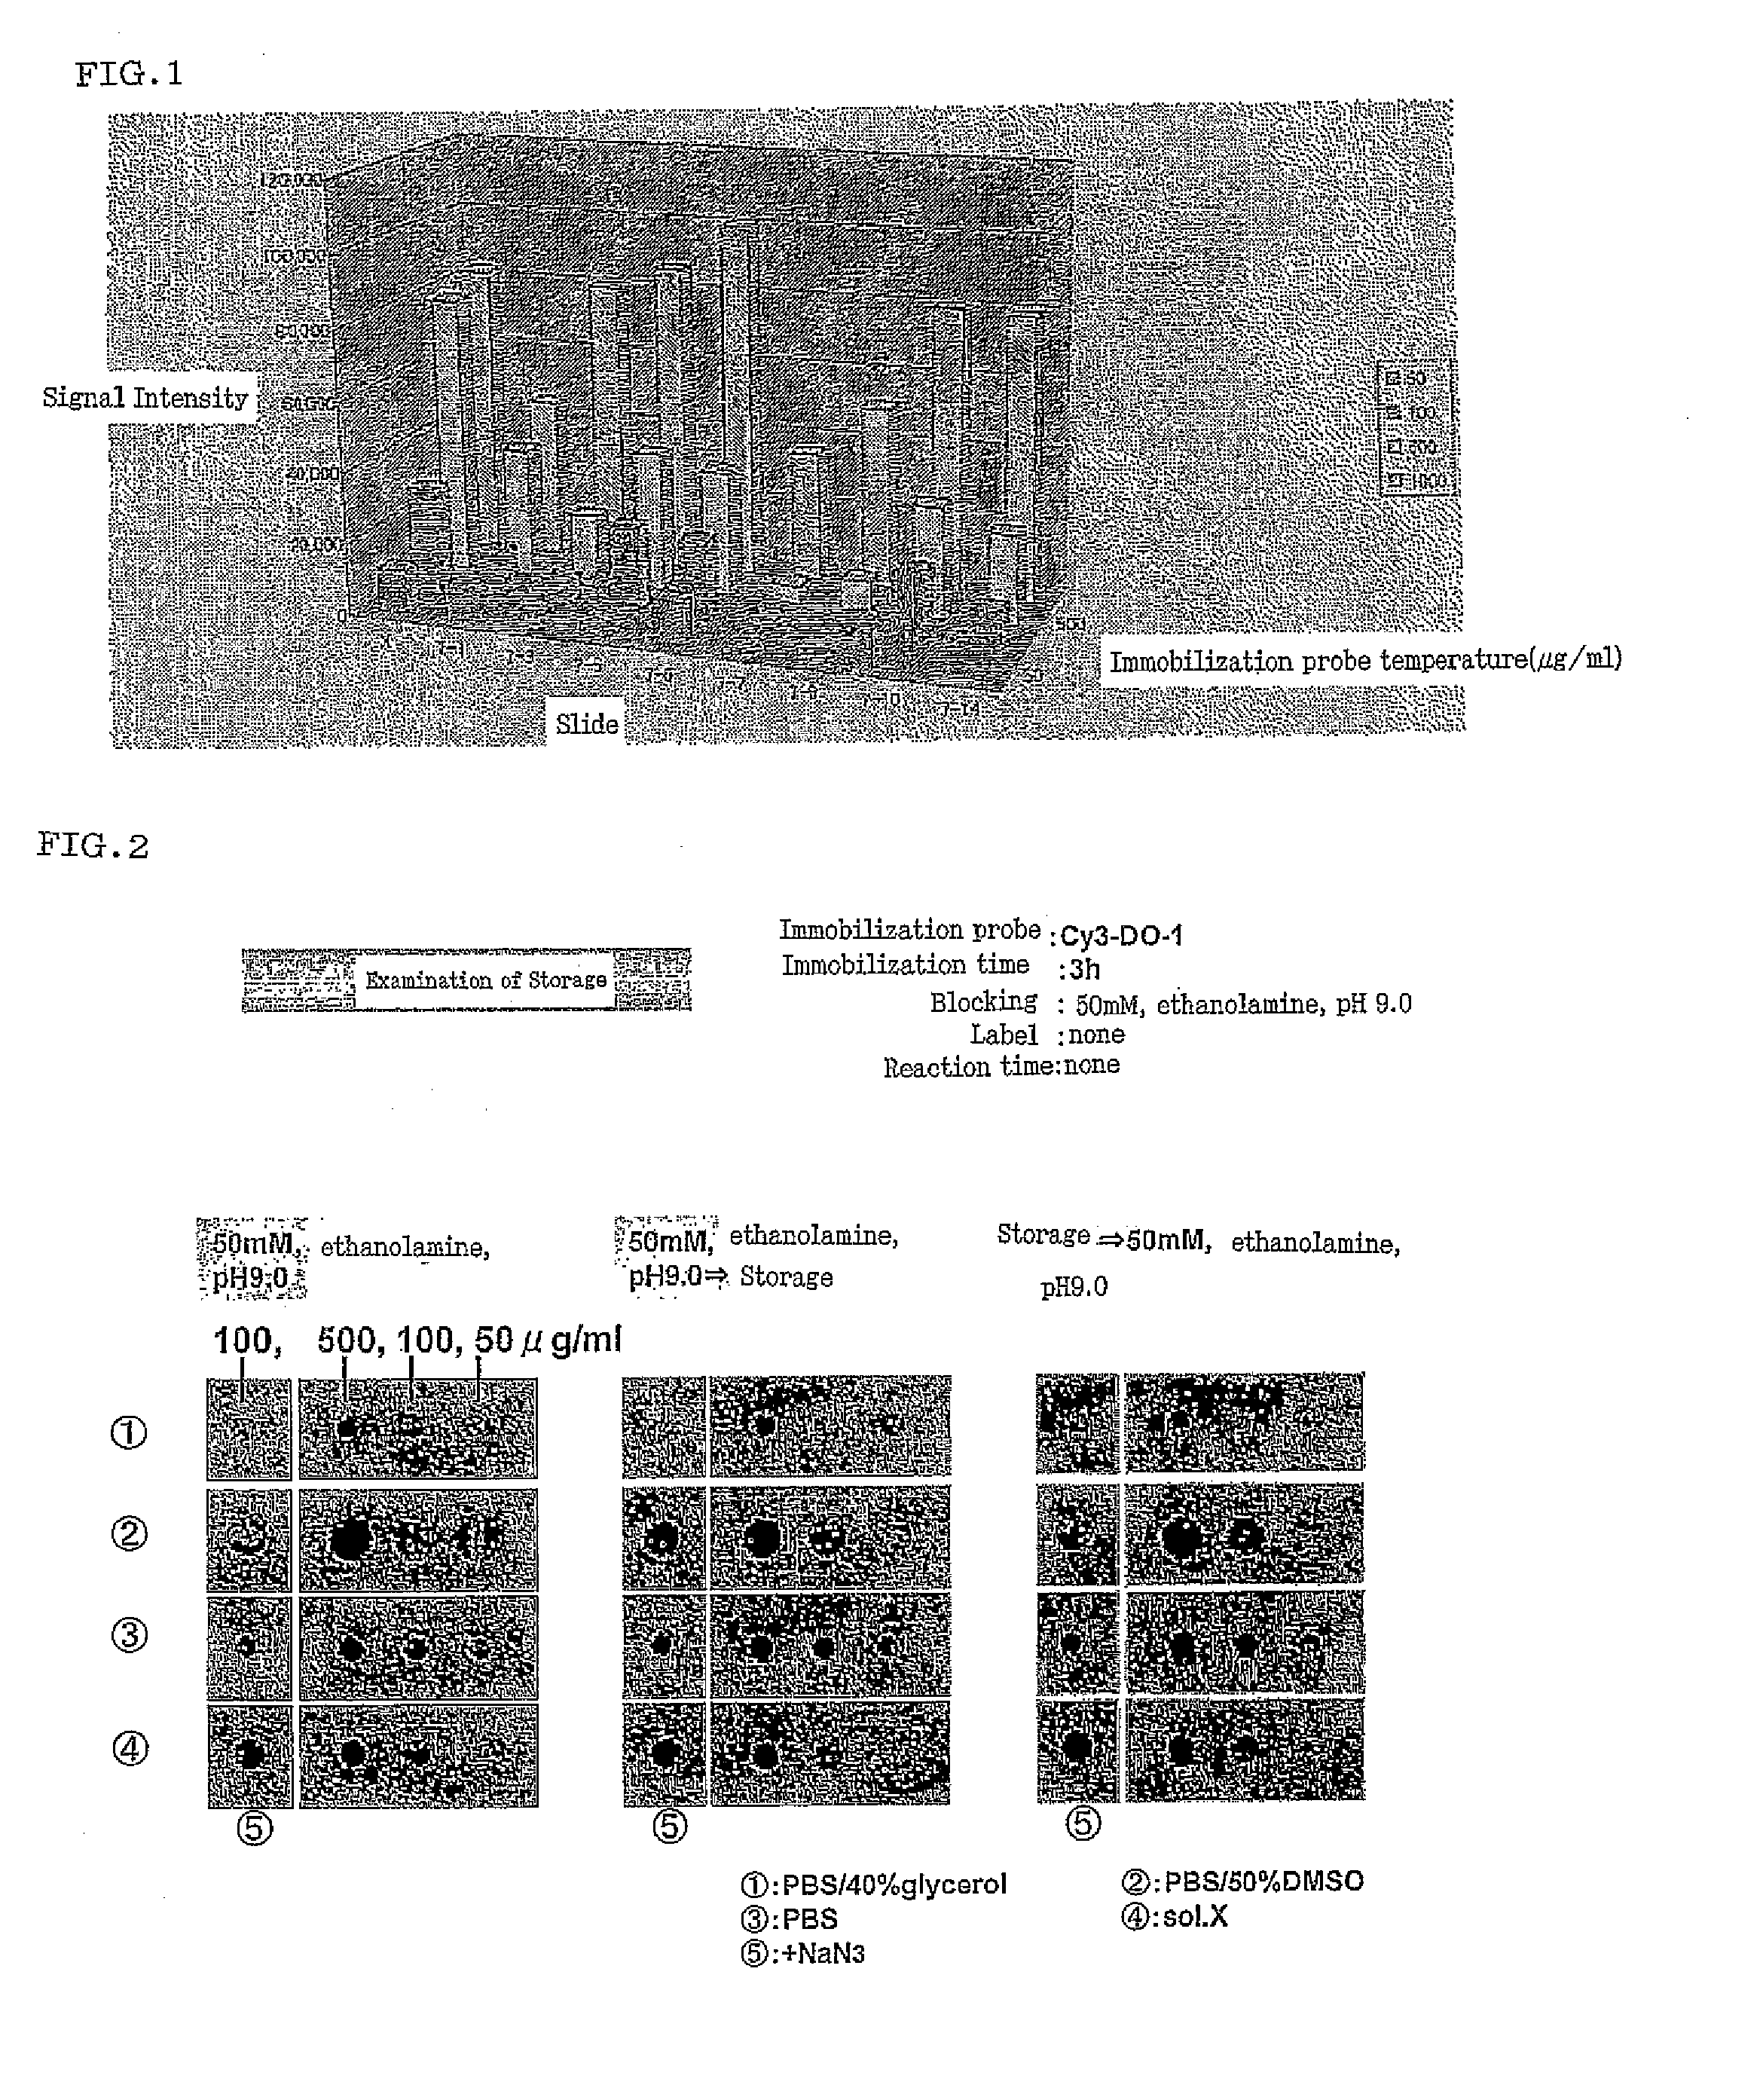 Monoclonal antibody specifically recognizing modification site after translation of p53 and kit for assaying modification site containing the same